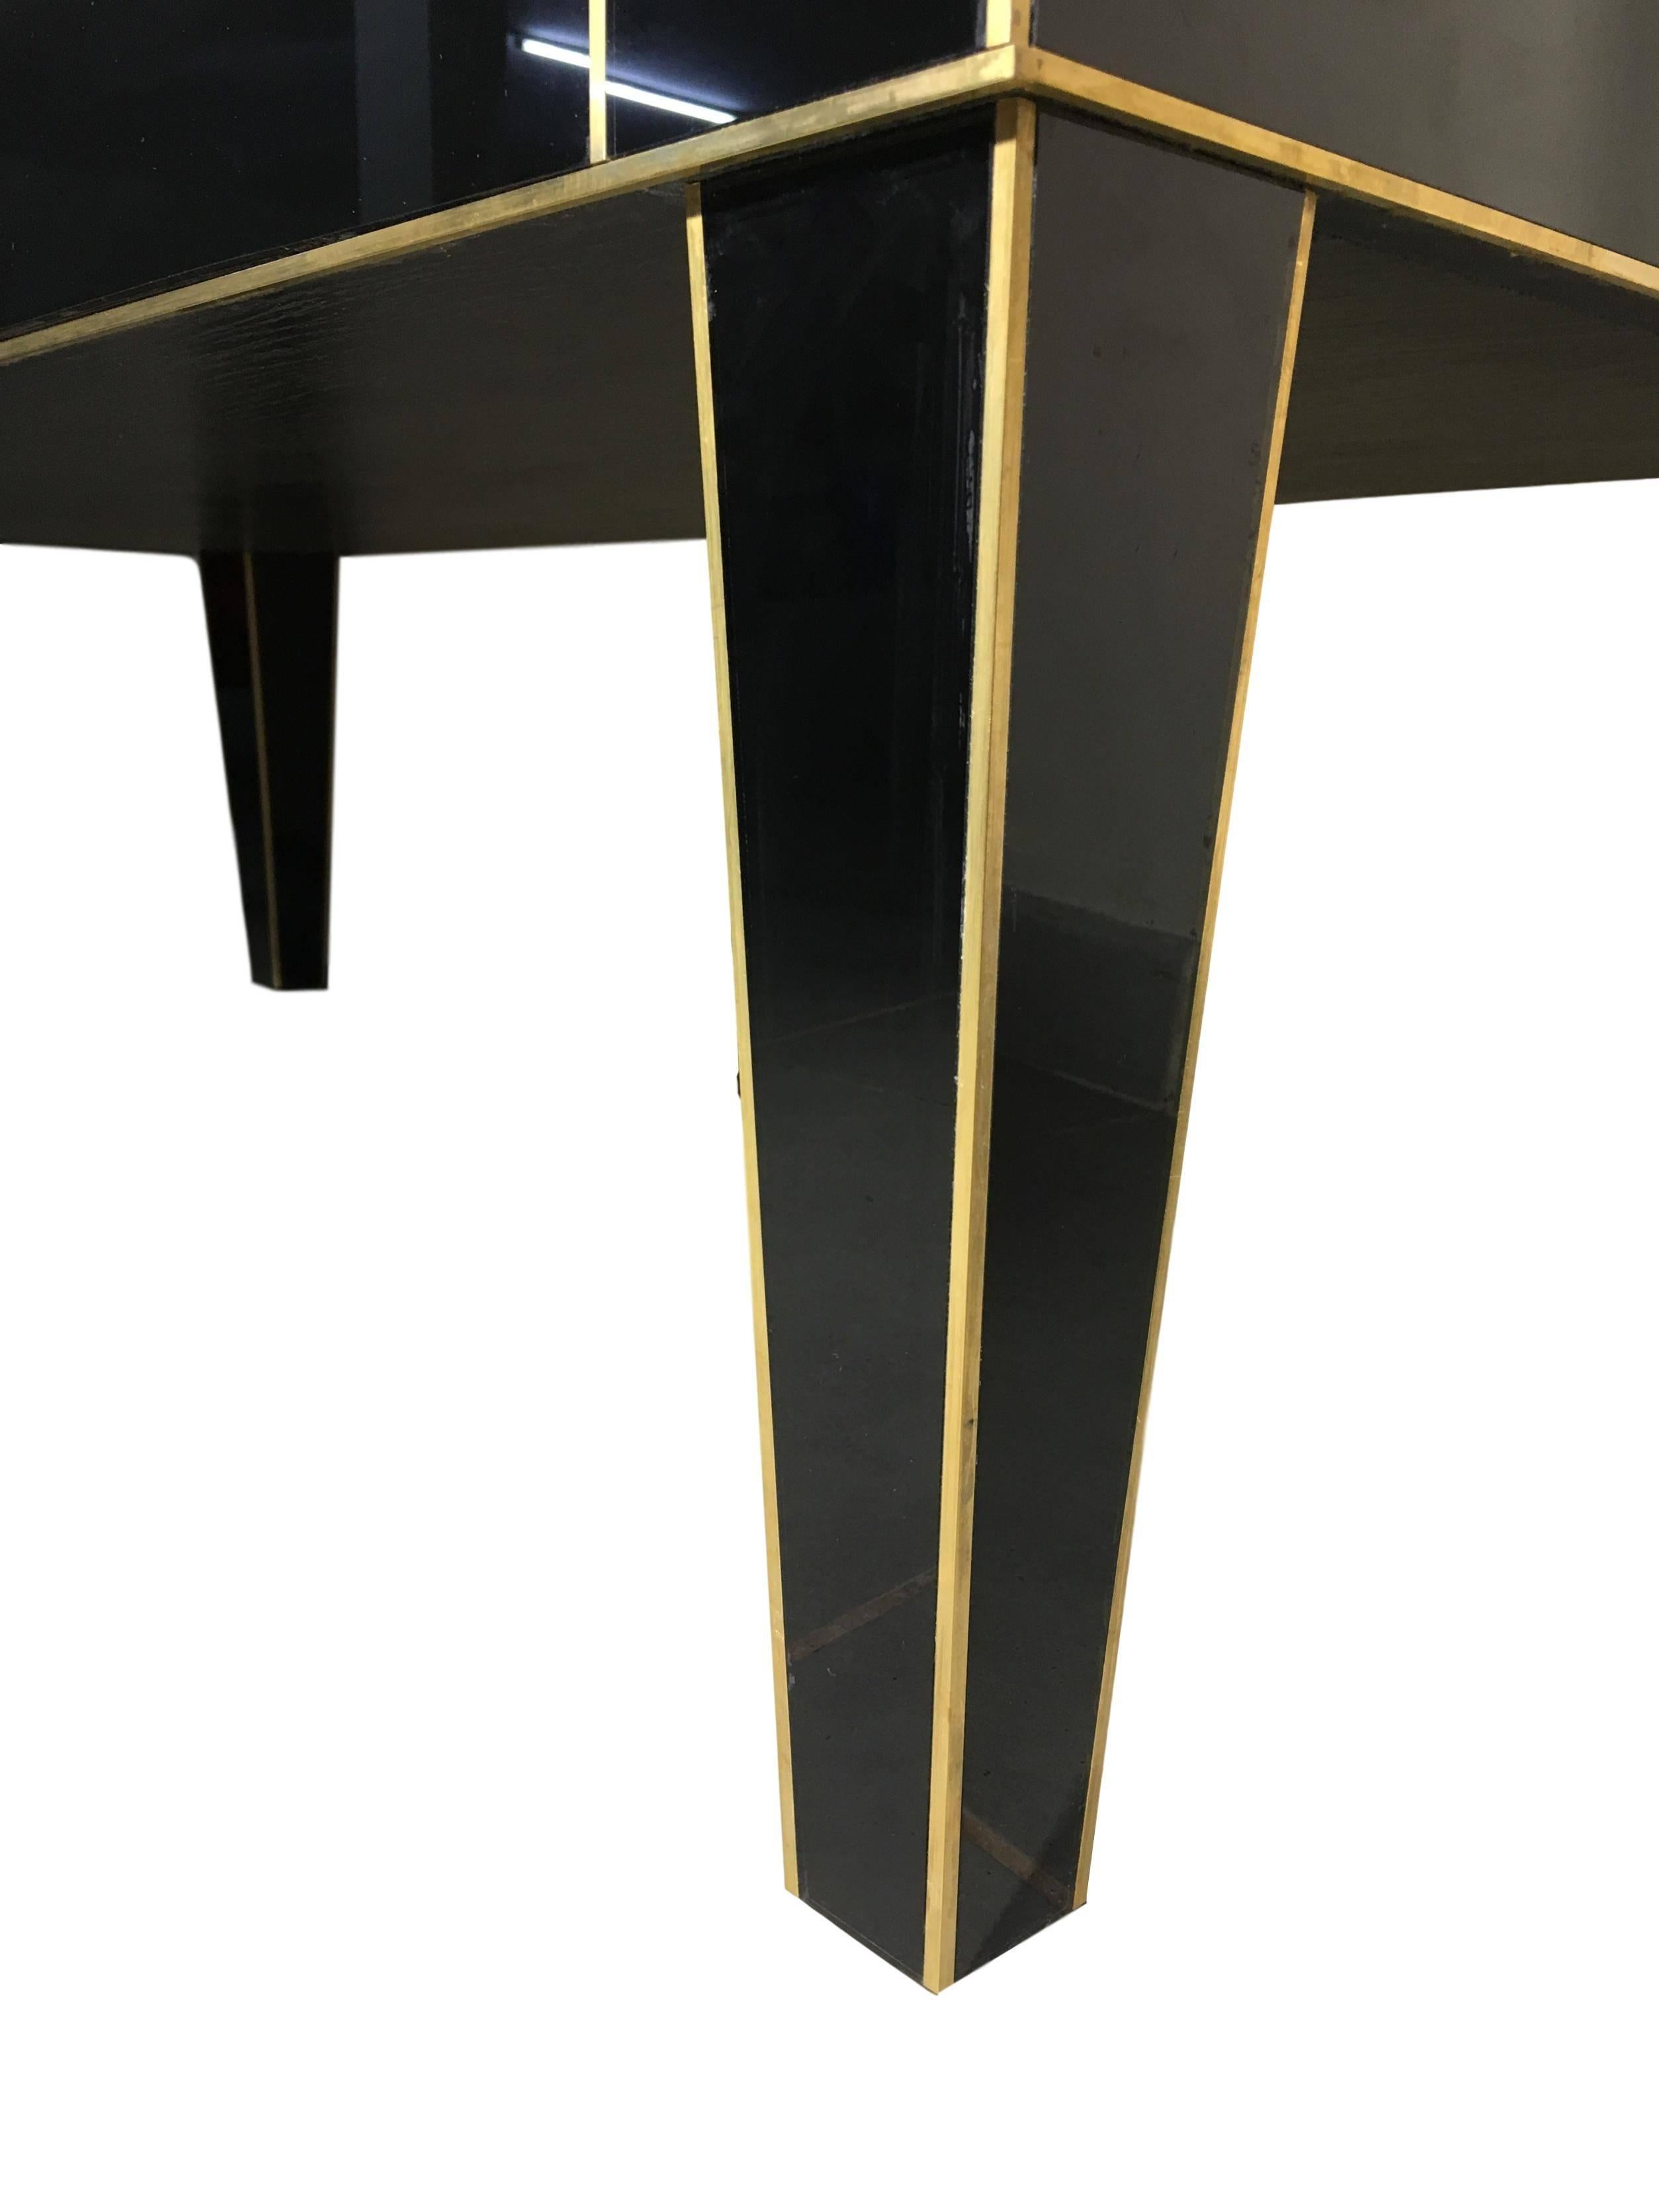 Stone Handmade Mirrored Commode or Chest of Drawers, Volcanic Rock and Brass Inlay